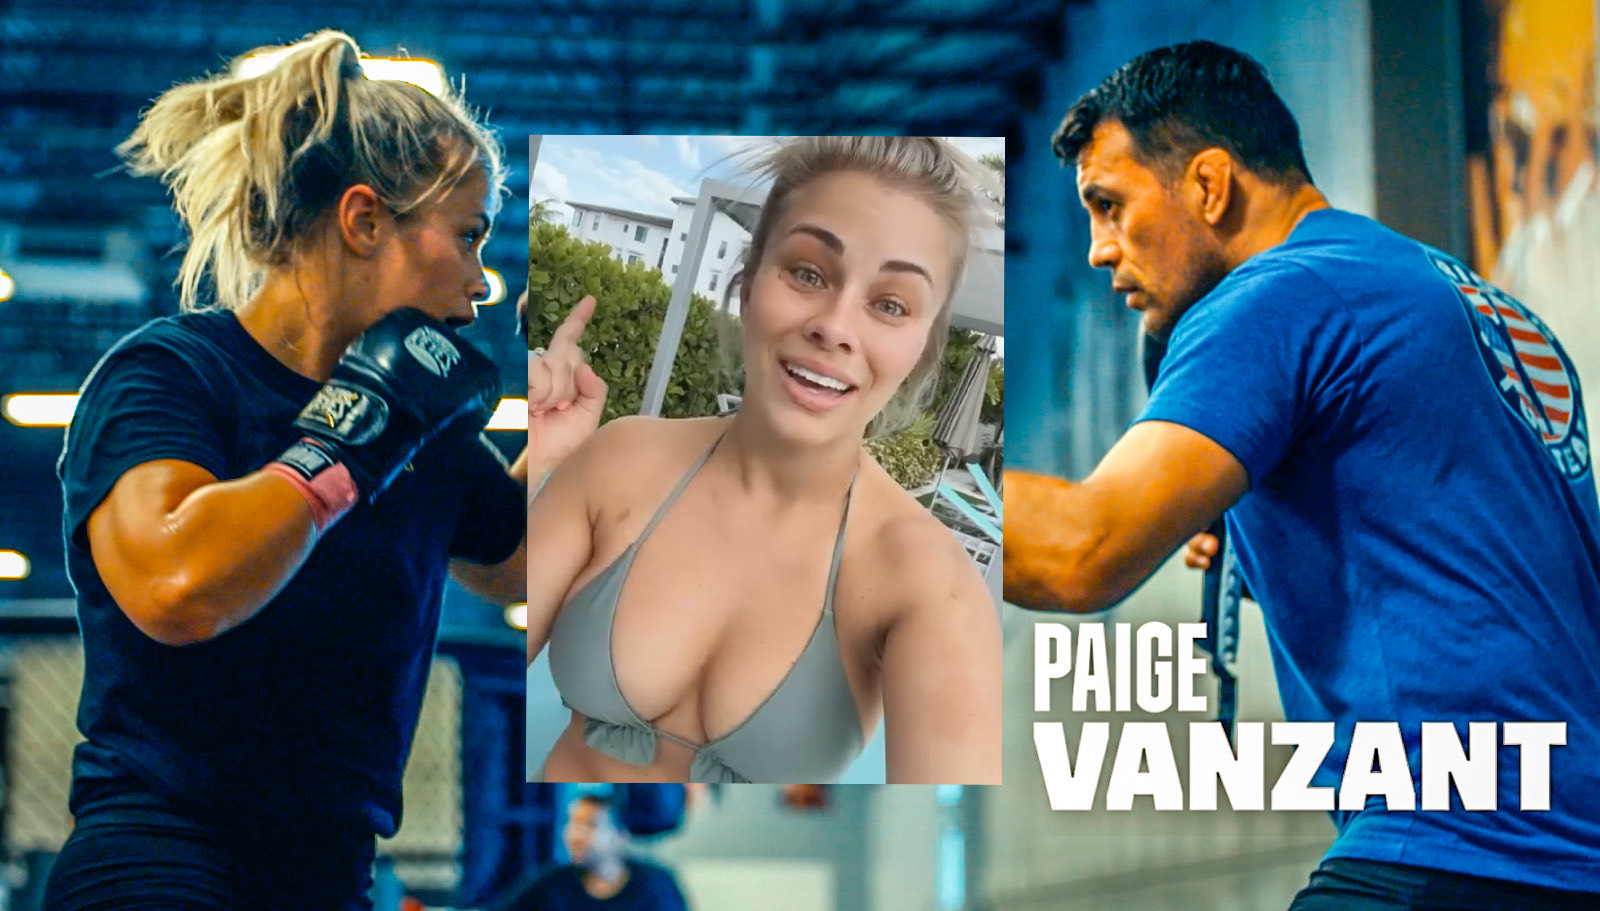 KnuckleMania Live Stream - How To Watch Paige VanZants Bare Knuckle Debut 